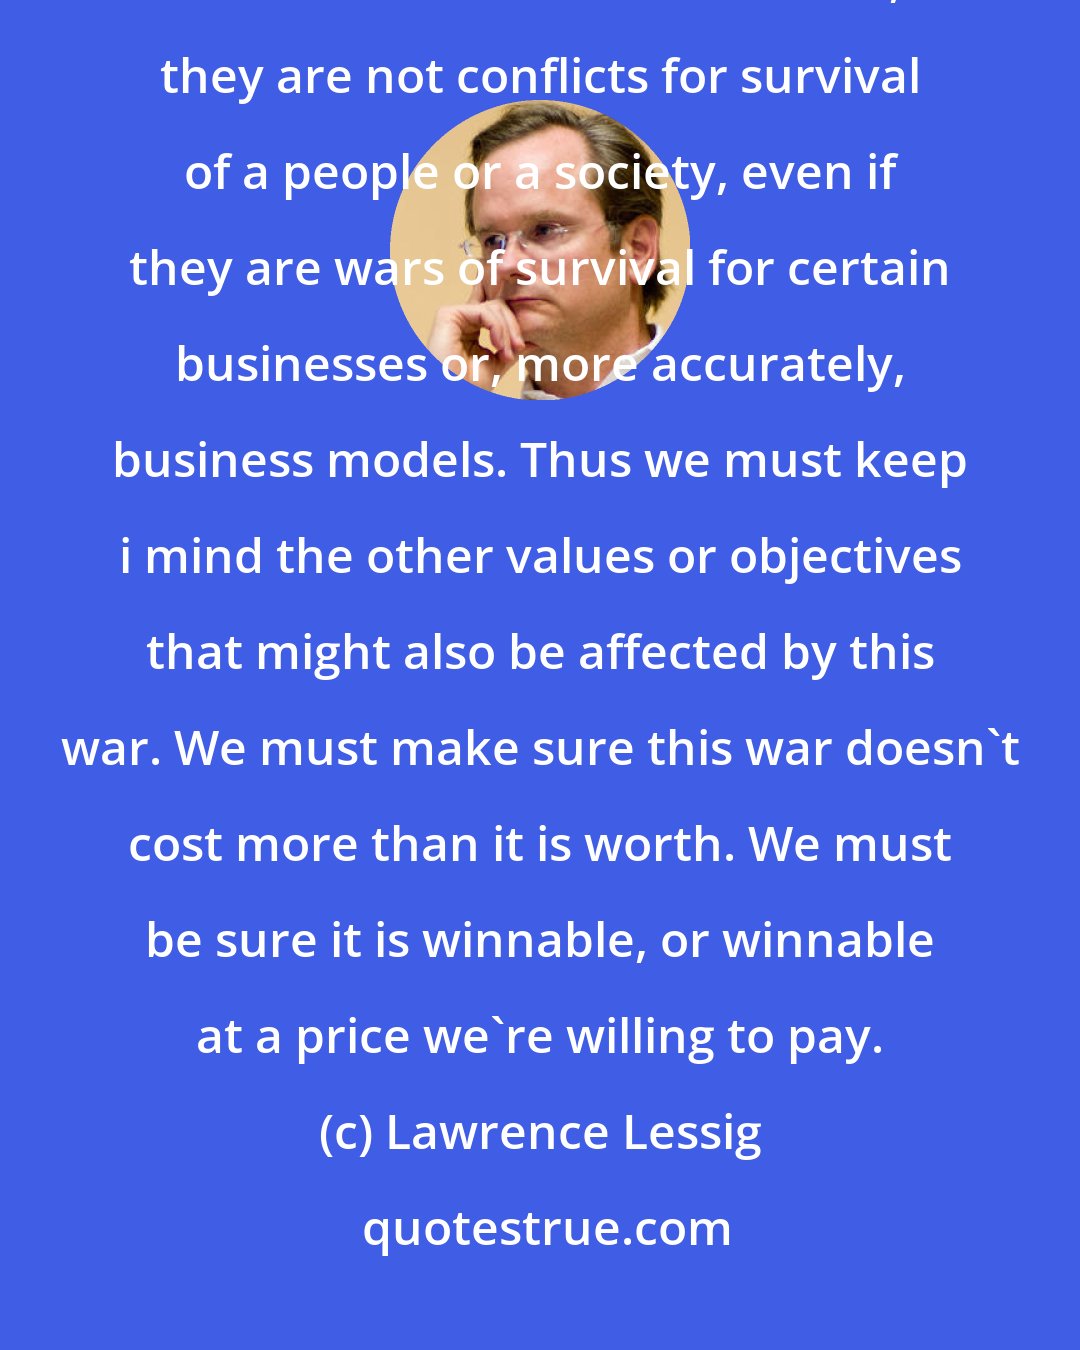 Lawrence Lessig: But, like all metaphoric wars, the copyright wars are not actual conflicts of survival. Or at least, they are not conflicts for survival of a people or a society, even if they are wars of survival for certain businesses or, more accurately, business models. Thus we must keep i mind the other values or objectives that might also be affected by this war. We must make sure this war doesn't cost more than it is worth. We must be sure it is winnable, or winnable at a price we're willing to pay.